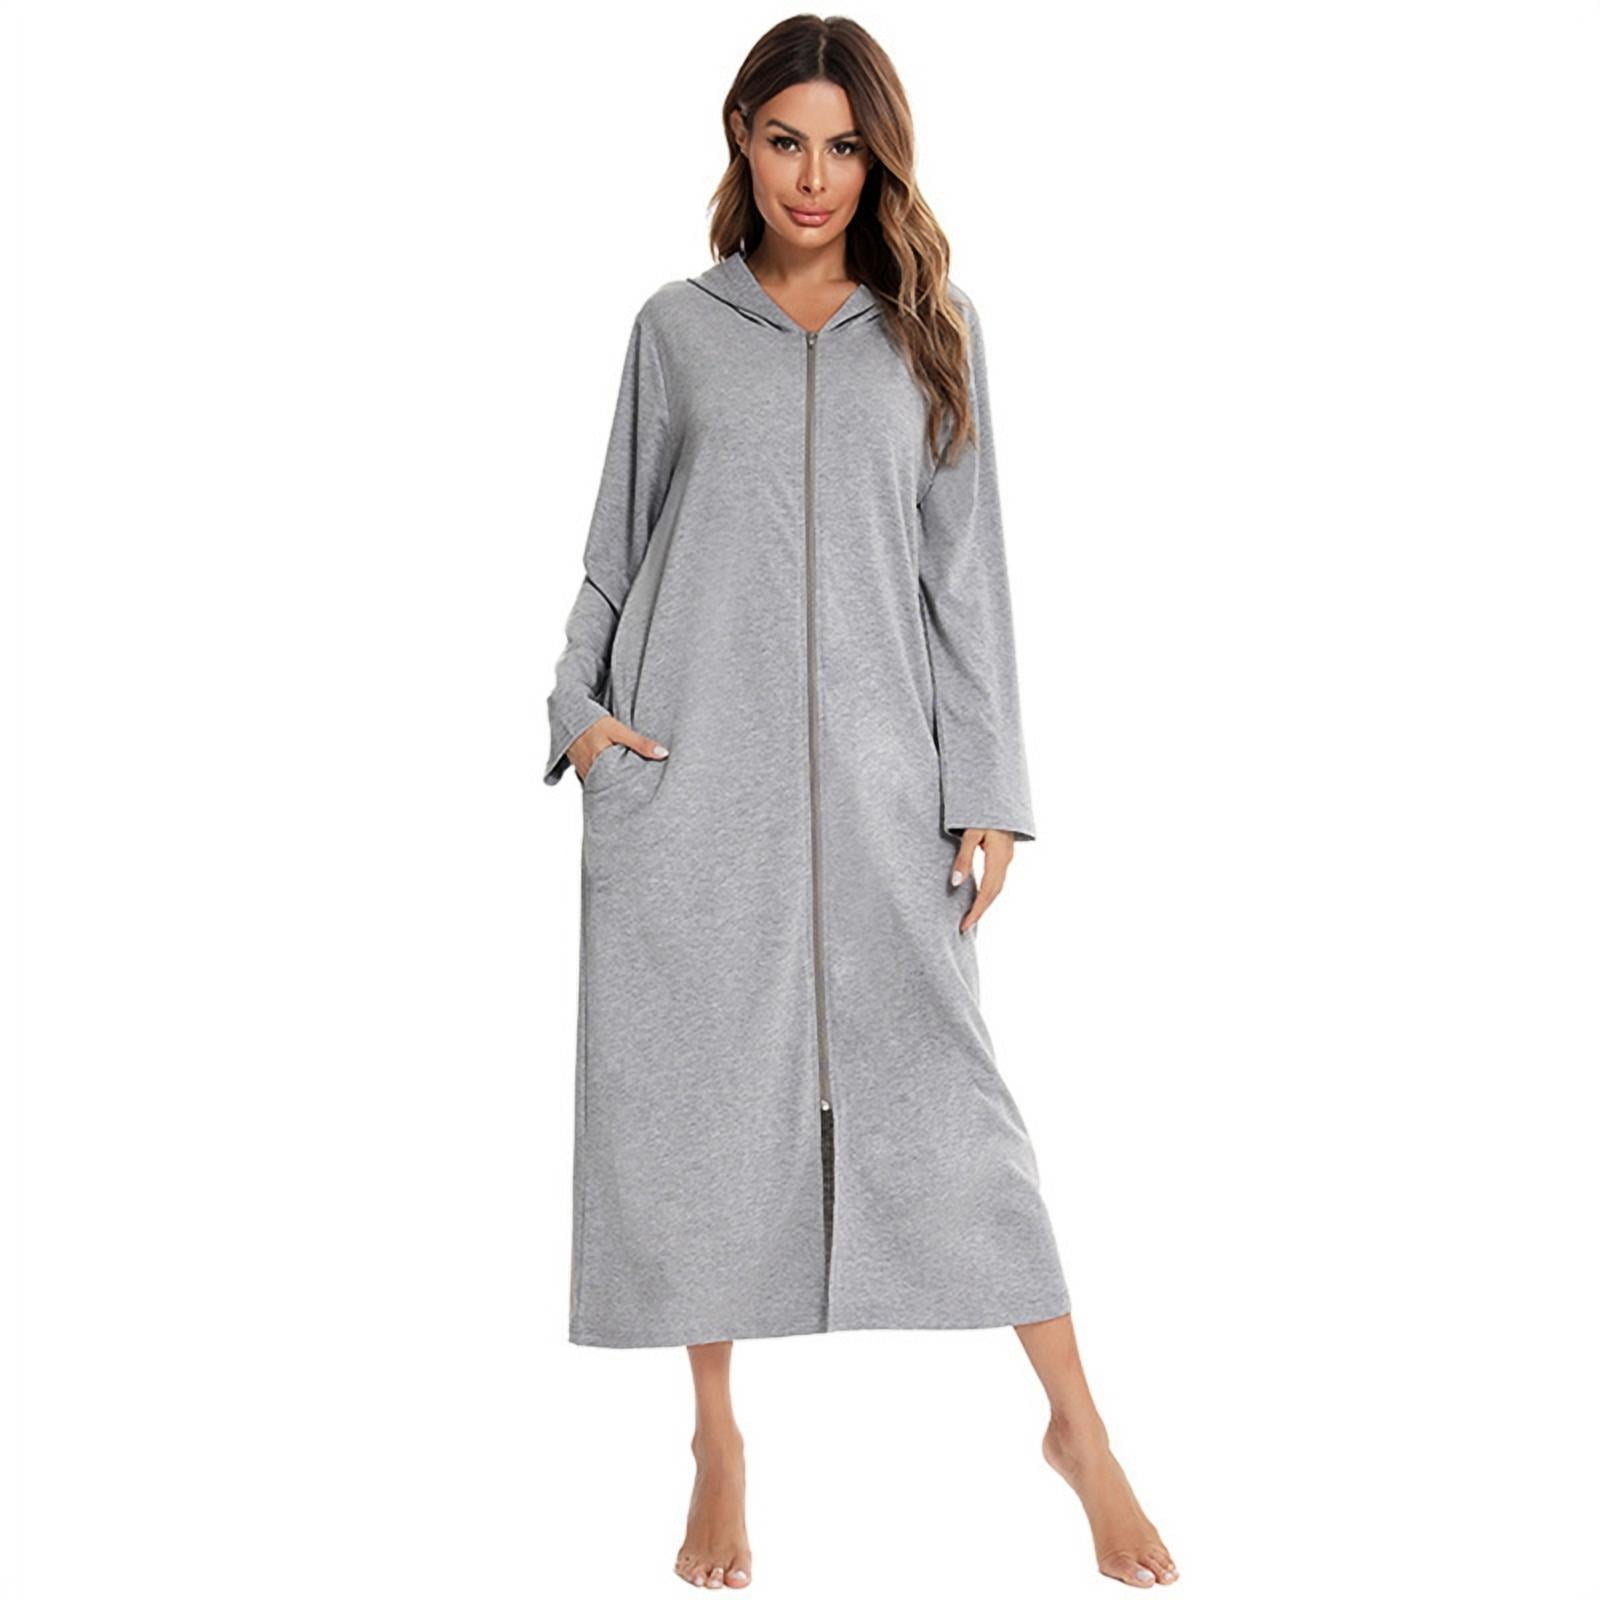 Ladies Soft Fleece Long Dressing Gown Sizes UK 10 to 24 Robe Zip Front Pockets 